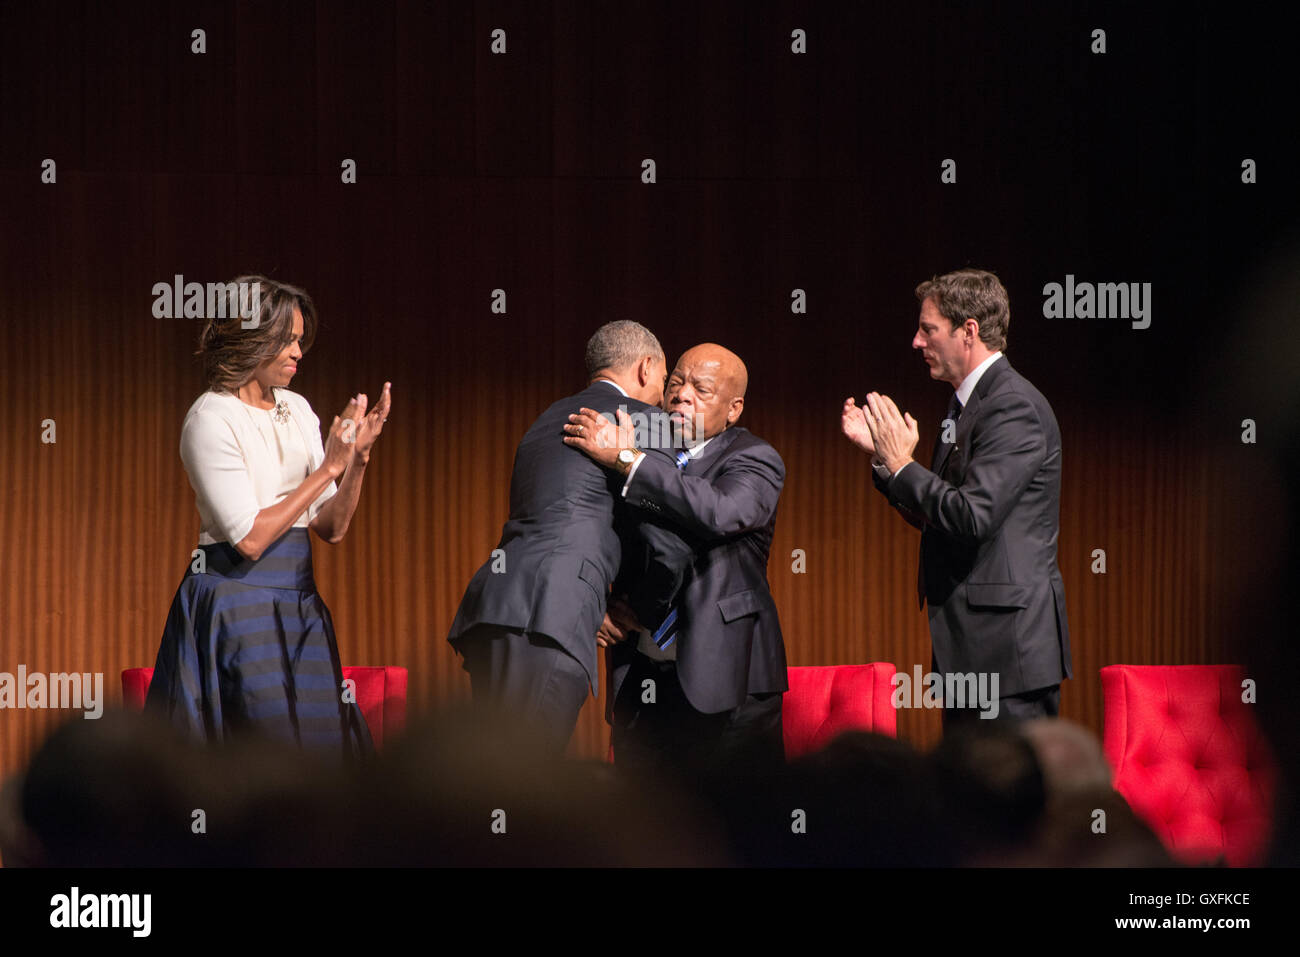 First Lady Michelle Obama and library director Mark Updegrove look on as U.S. President Barack Obama hugs civil rights leader Rep. John Lewis during a program at the LBJ Presidential Library April 10, 2014 in Austin, Texas Stock Photo